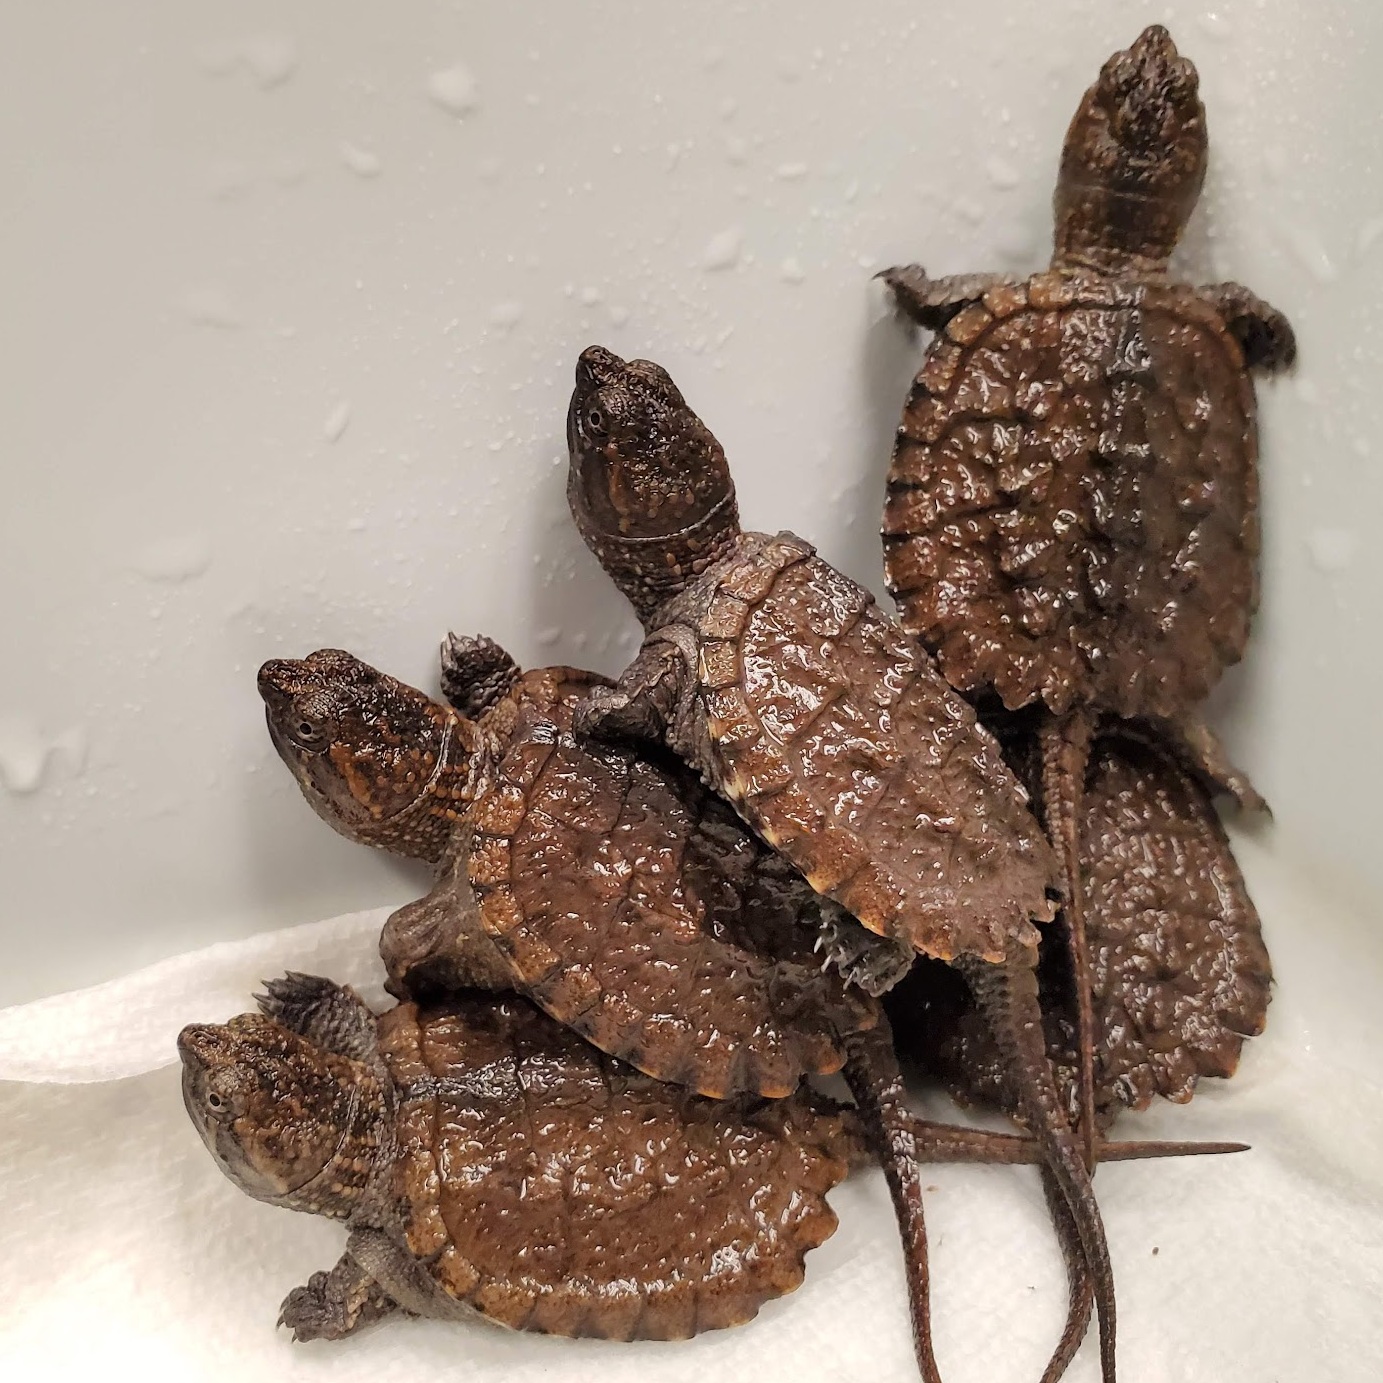 image of baby snapping turtles